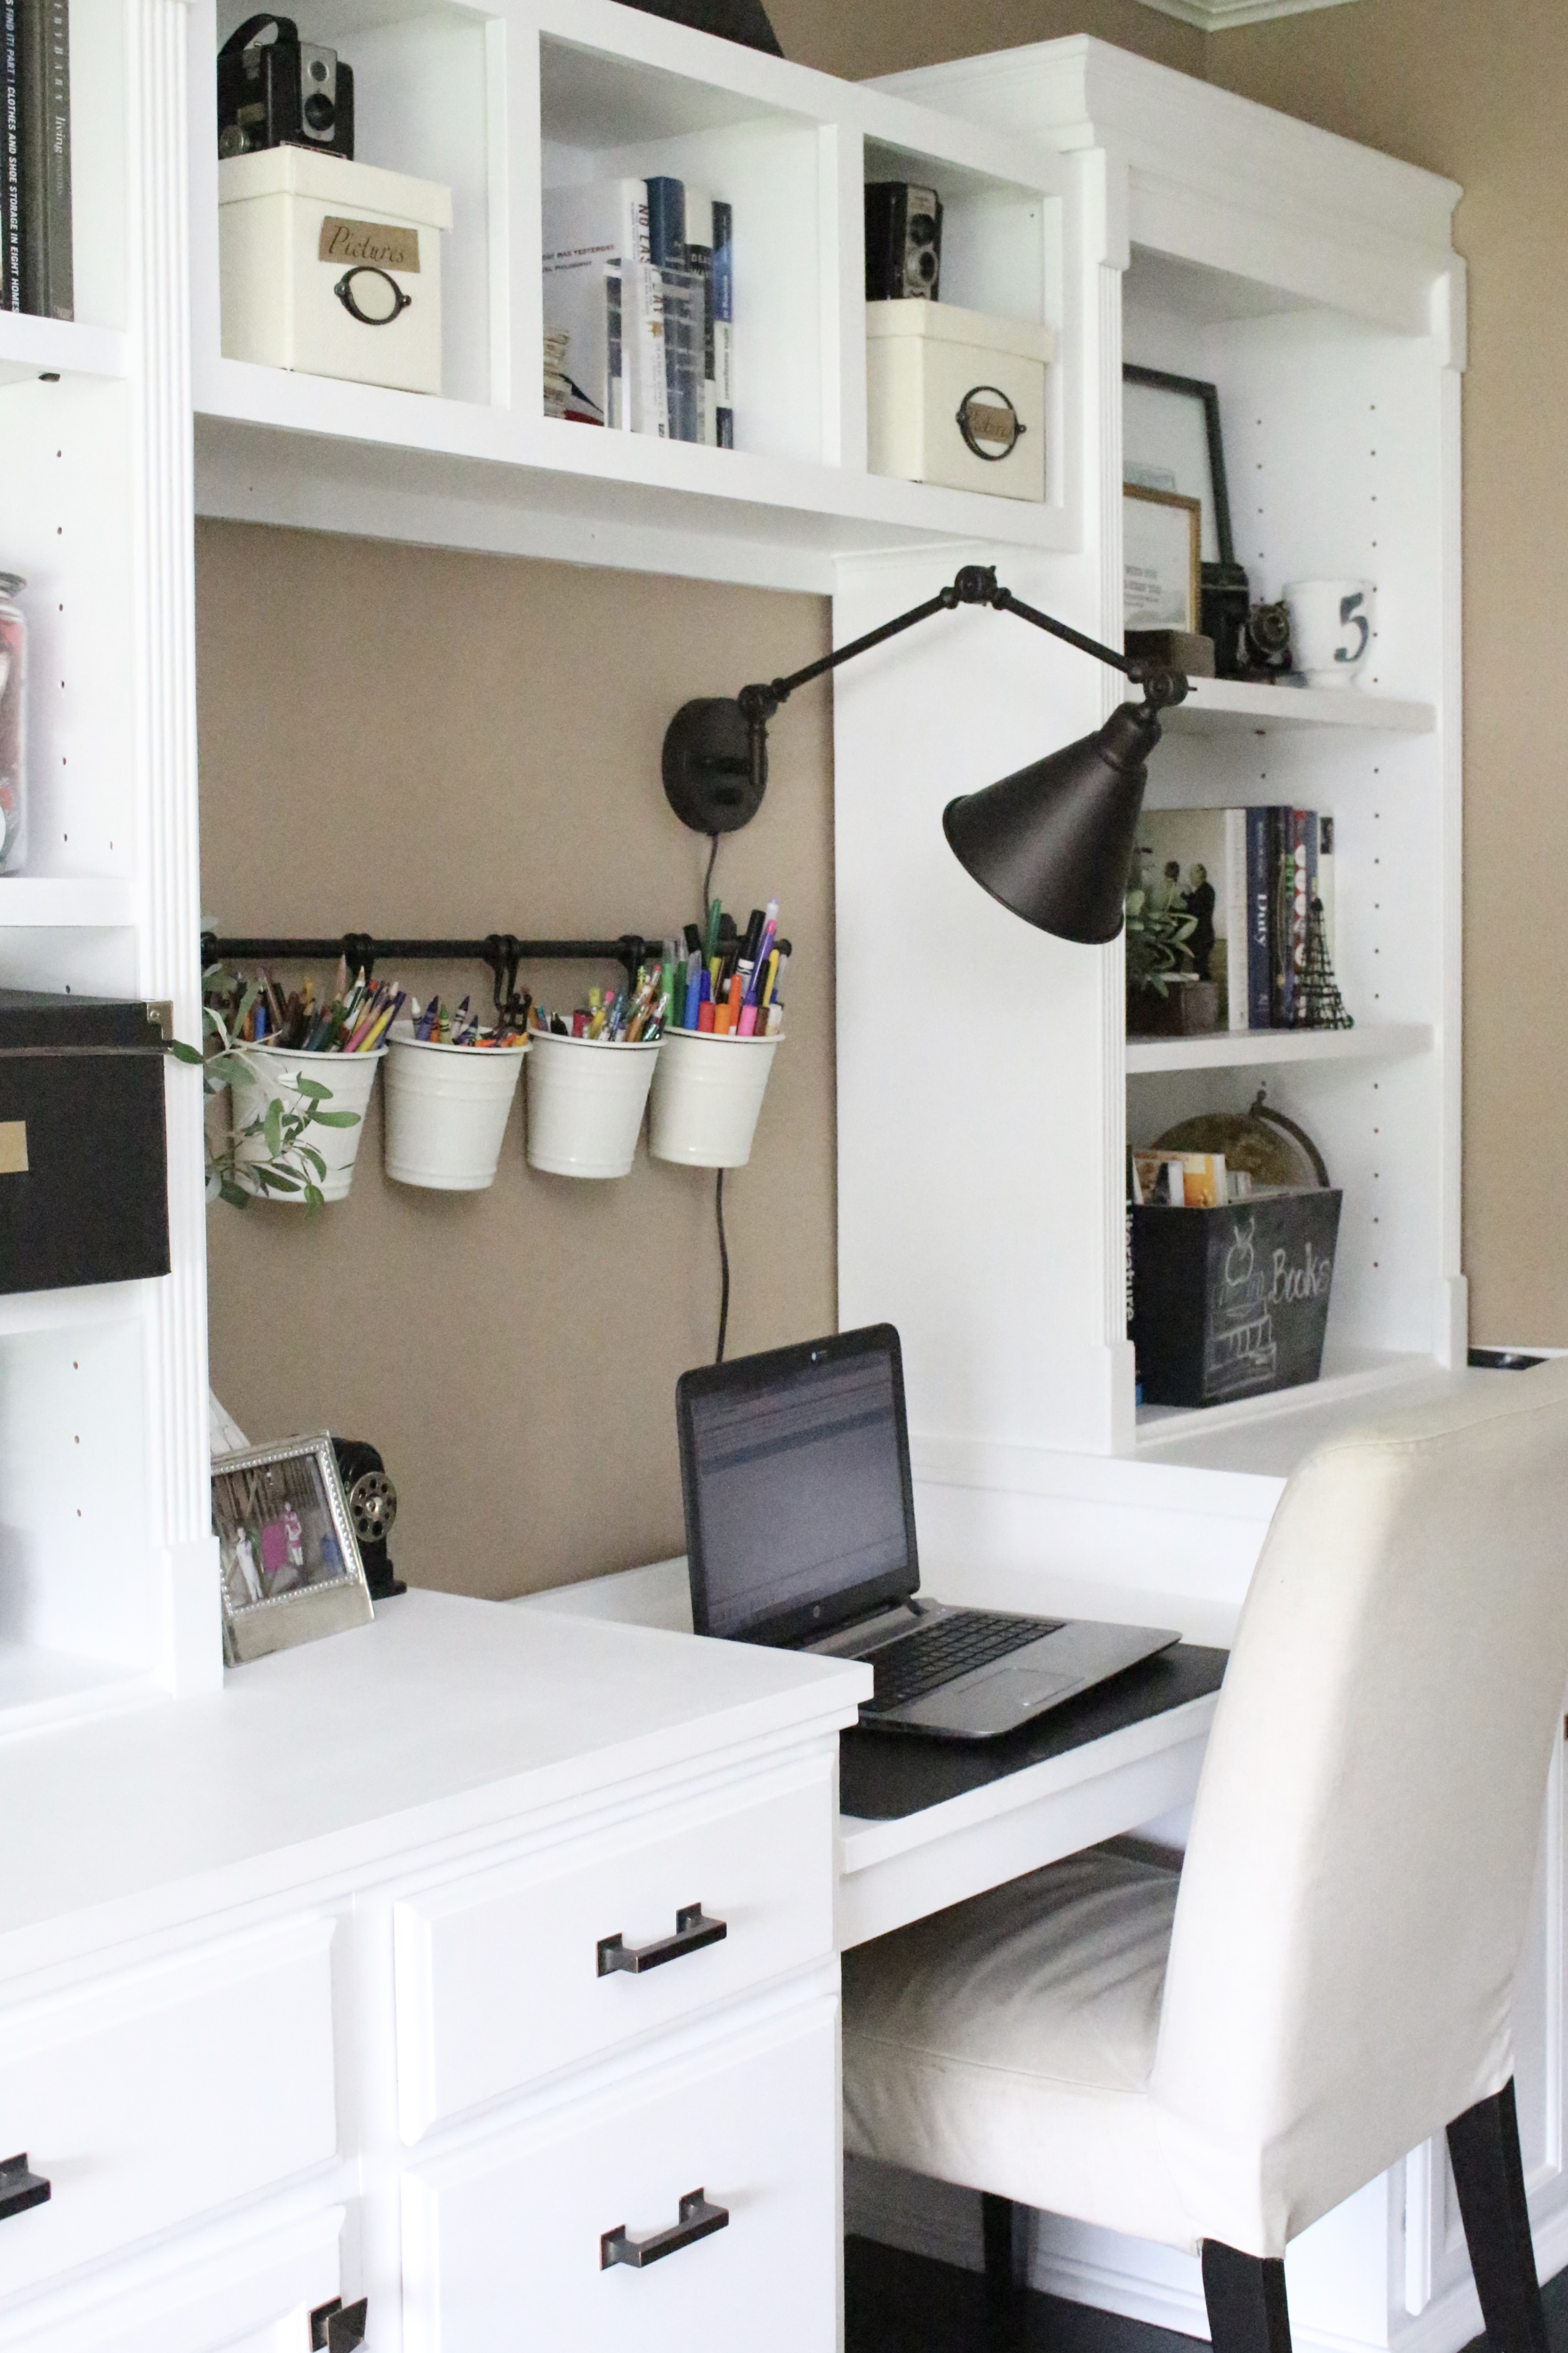 Home office ideas- craft room- reveal- home office space- craft supply storage ideas- One Room Challenge- renovation- home tour- office makeover- One Room Challenge Reveal Week 6- farmhouse style office- neutral decor- built in shelving- styling shelves